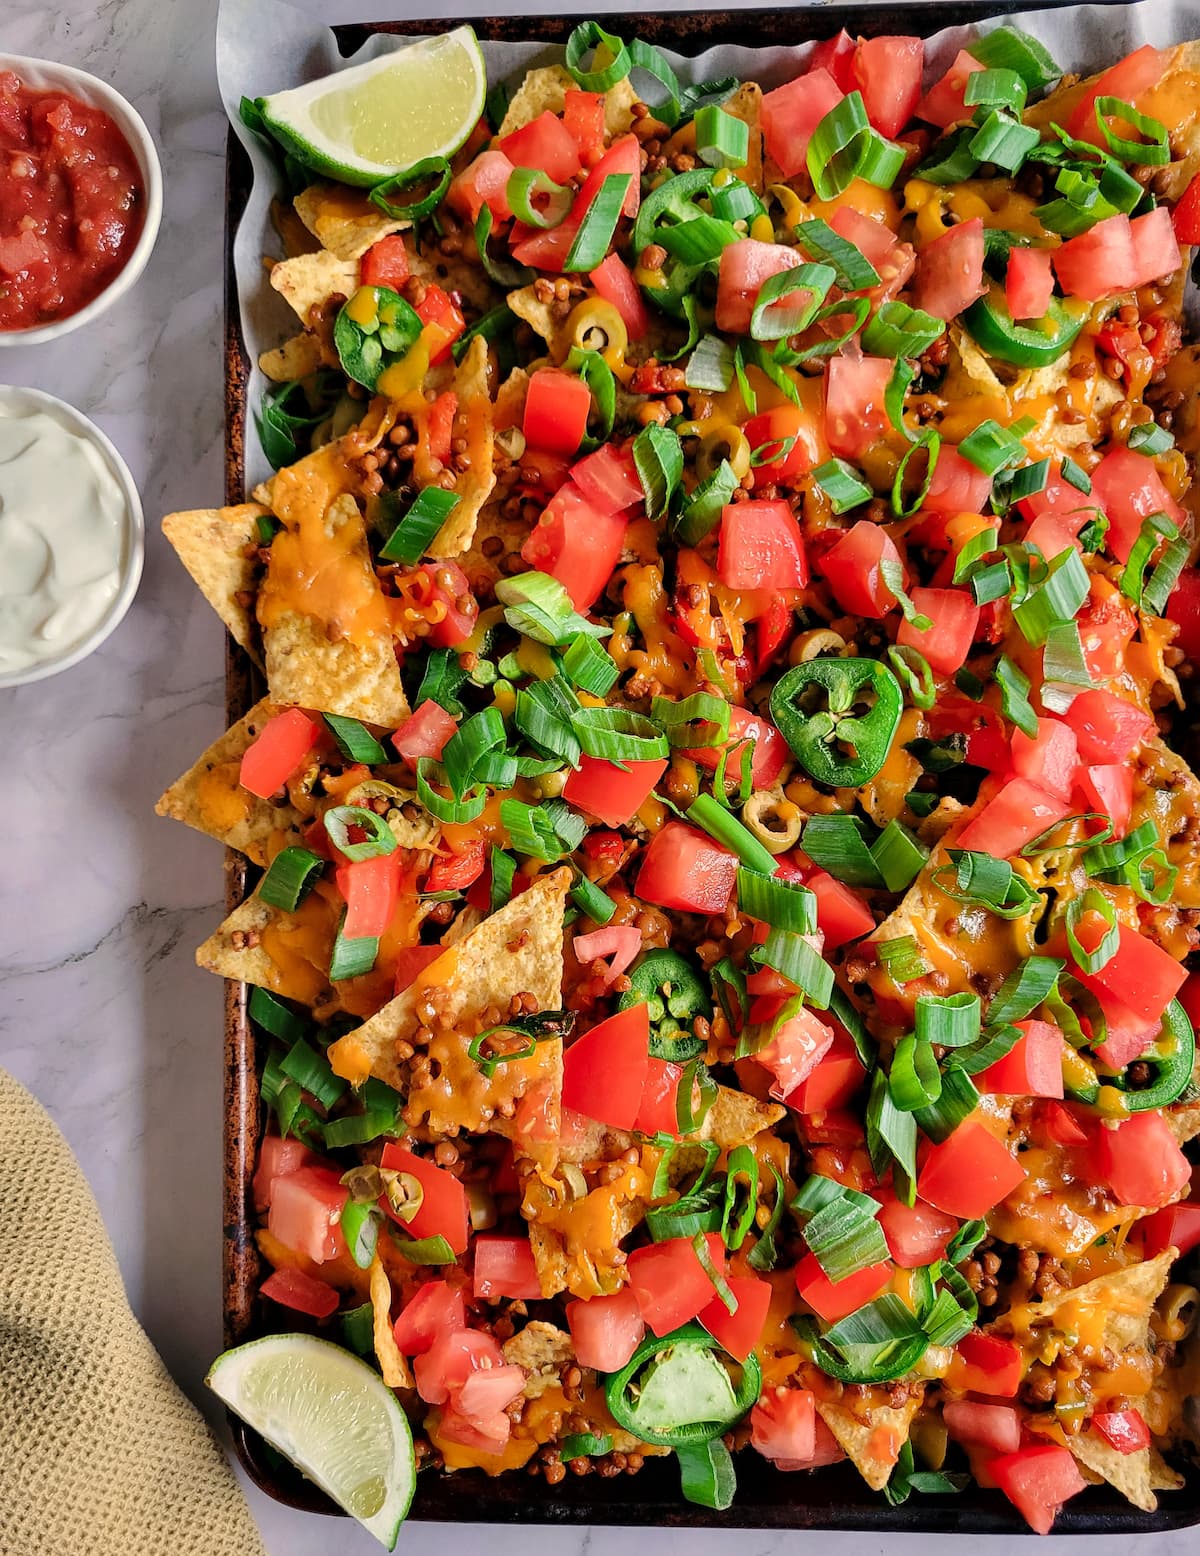 tortilla chips on a baking sheet loaded with chopped tomatoes, green onions, lentils, green olives, cheddar cheese, tomatoes, sour cream and salsa on the side